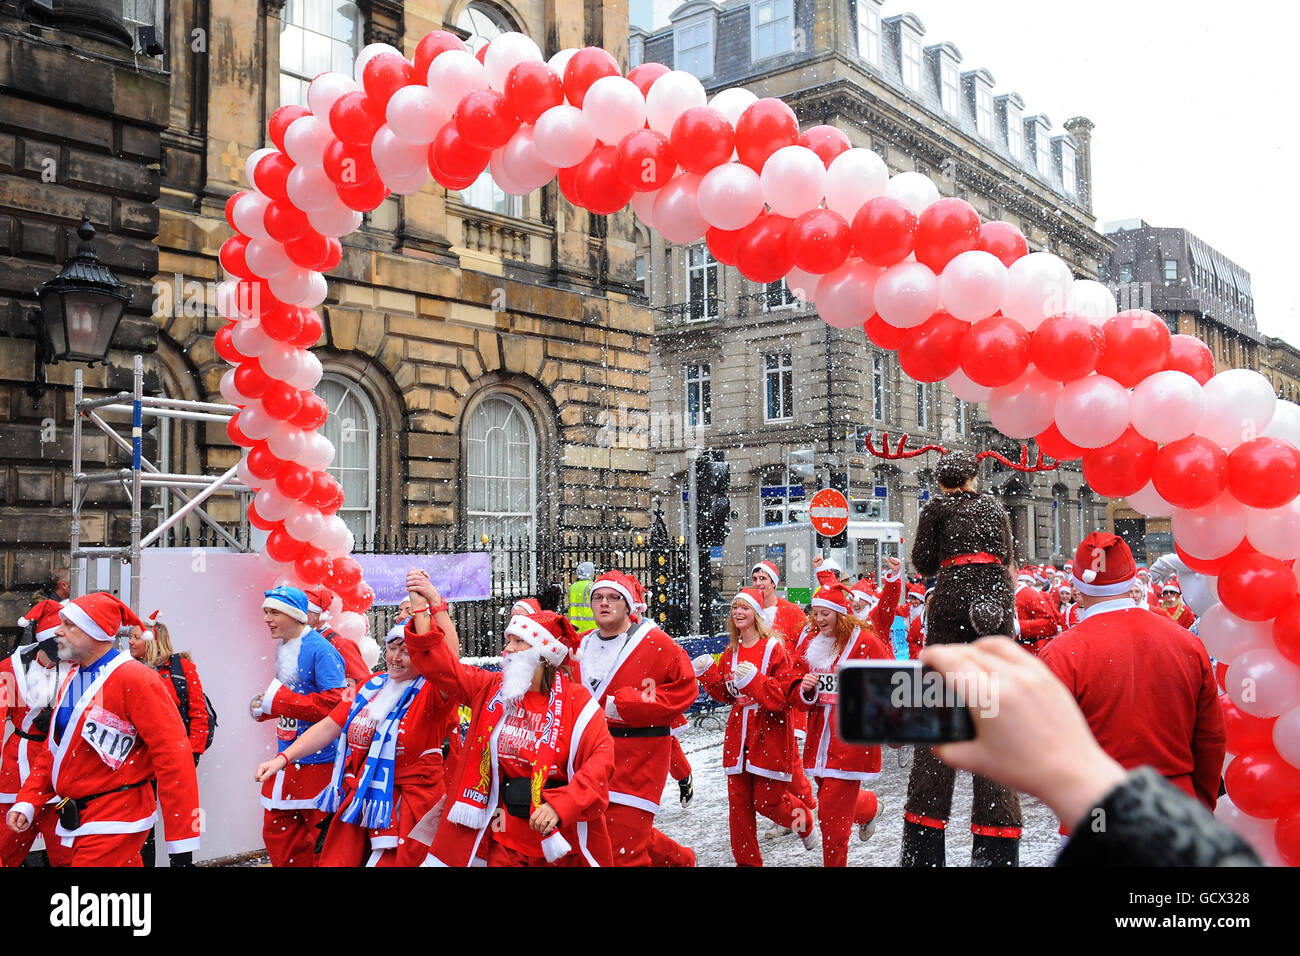 Runners cross the finish line, as ten thousand people dress as Santa to run the annual 5km Liverpool Santa Dash, hoping to take the World Santa Challenge title back from Las Vegas. Stock Photo